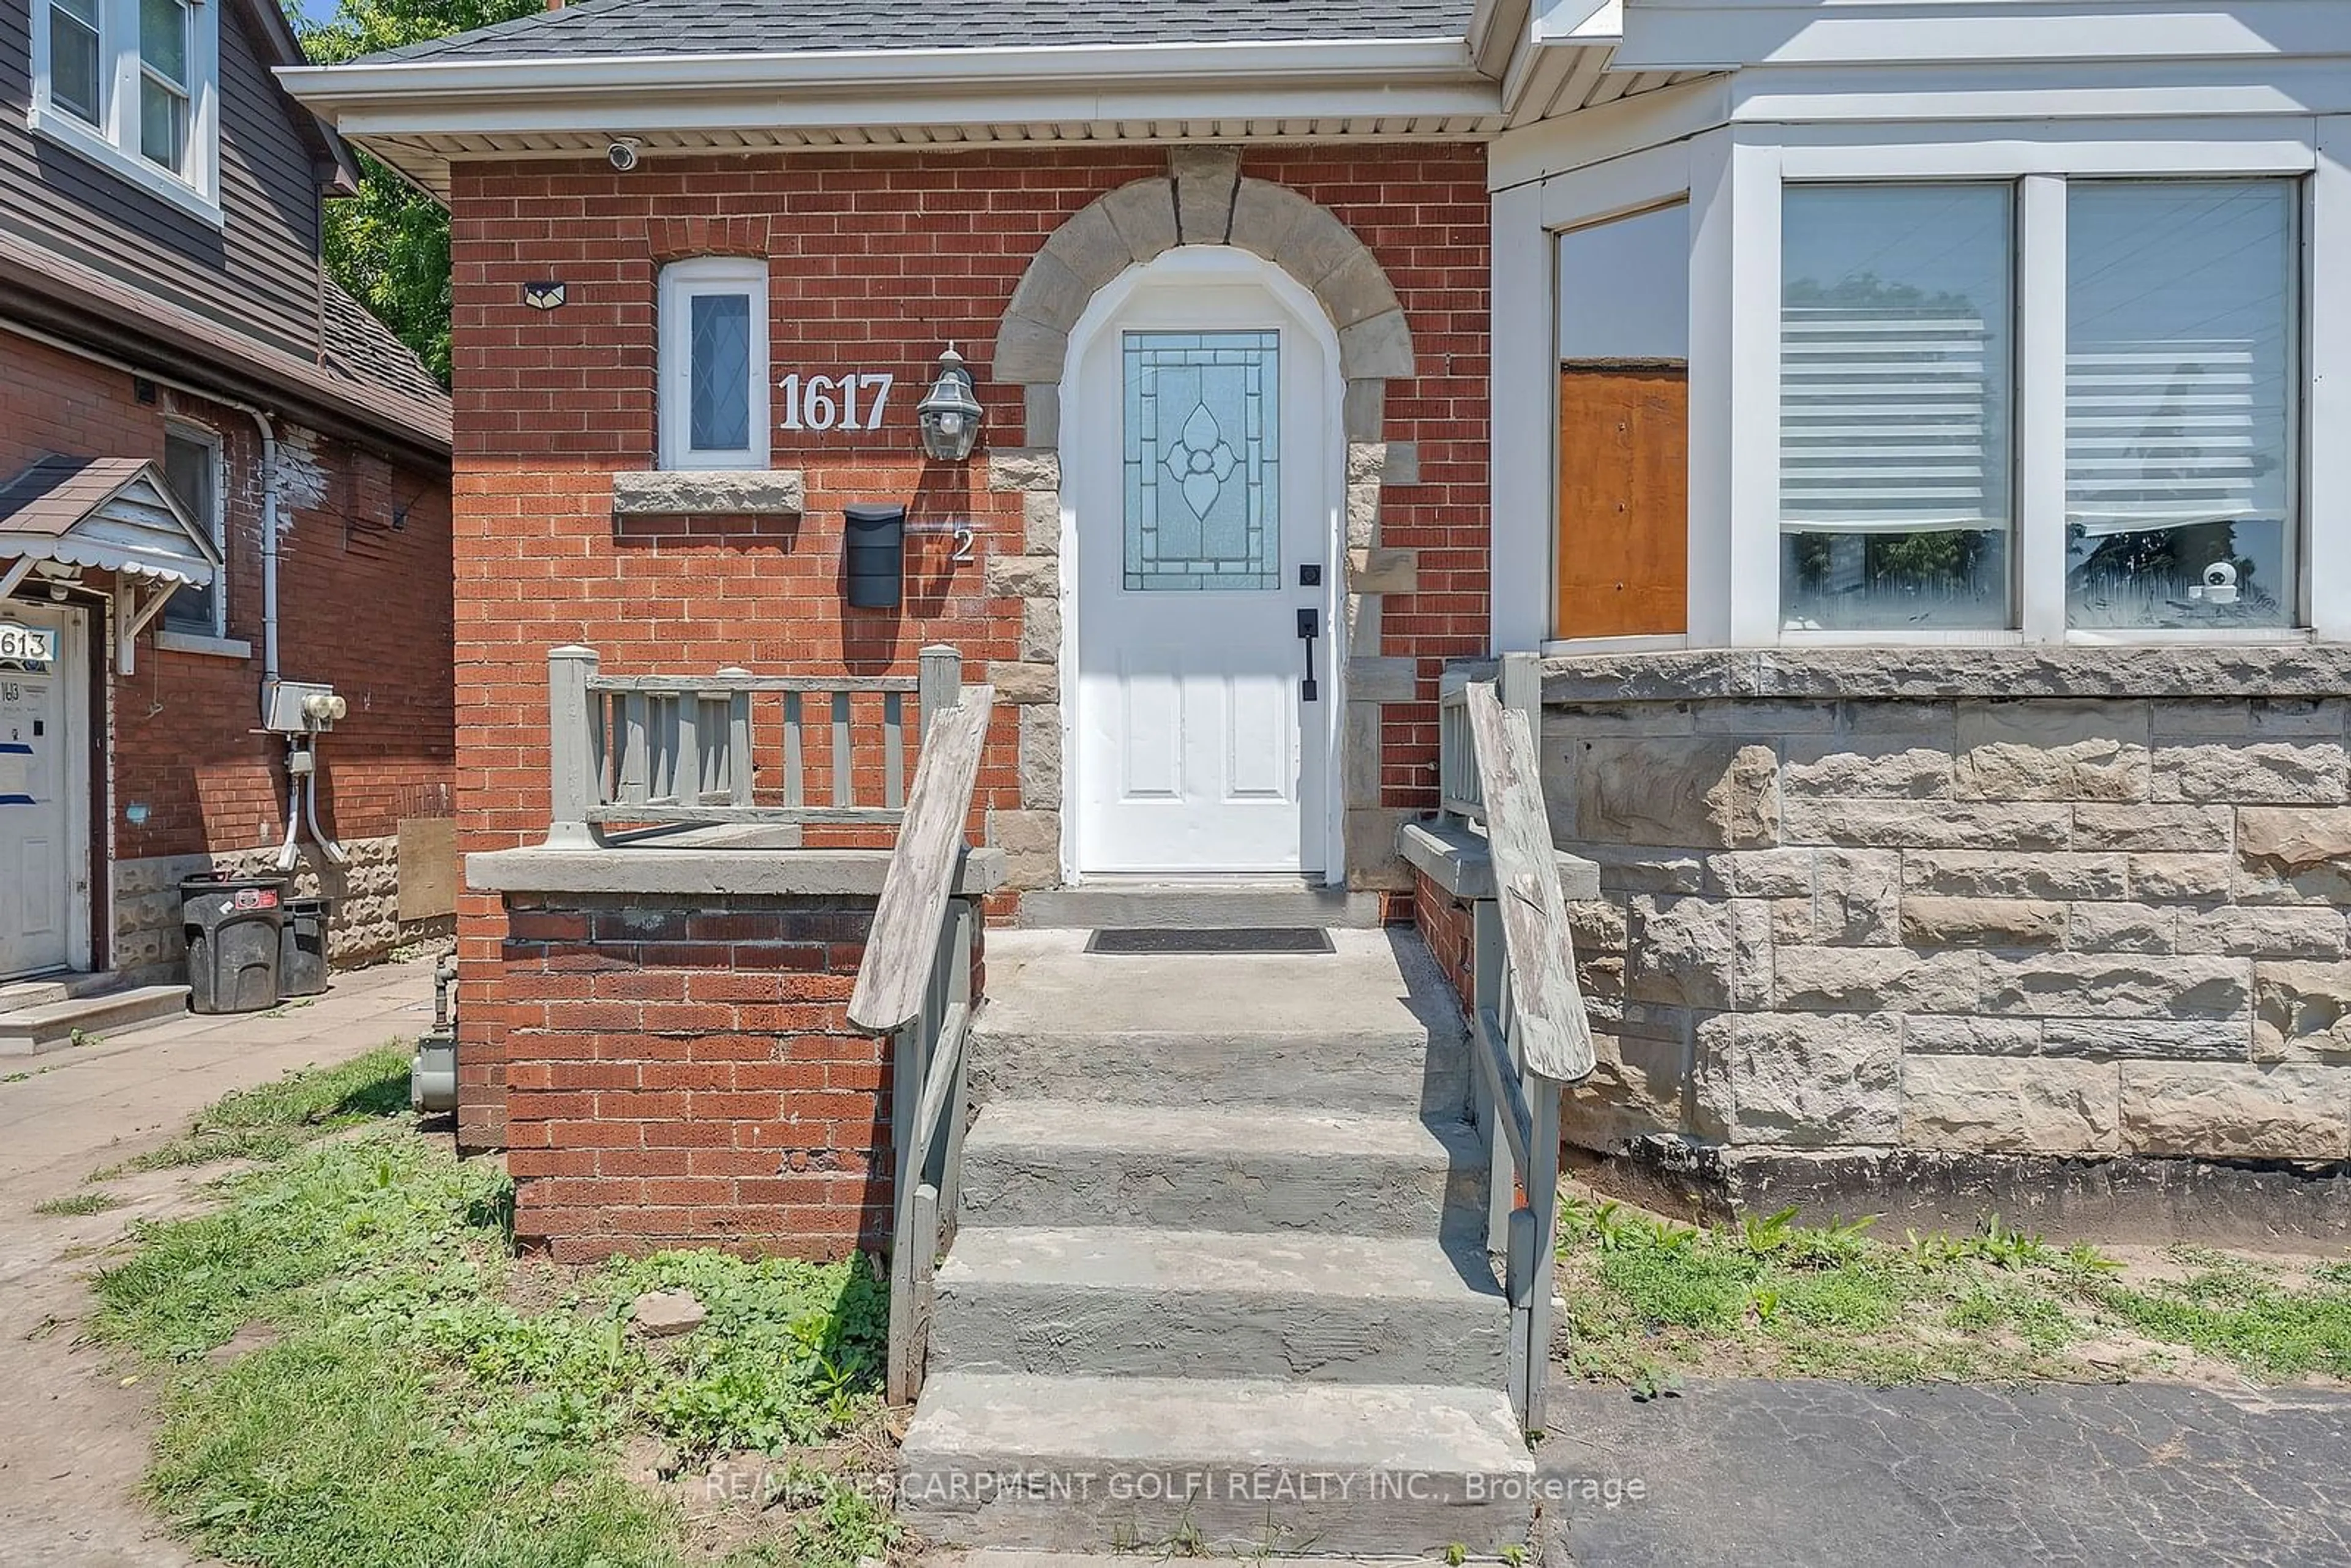 Outside view for 1617 Main St, Hamilton Ontario L8H 1C4